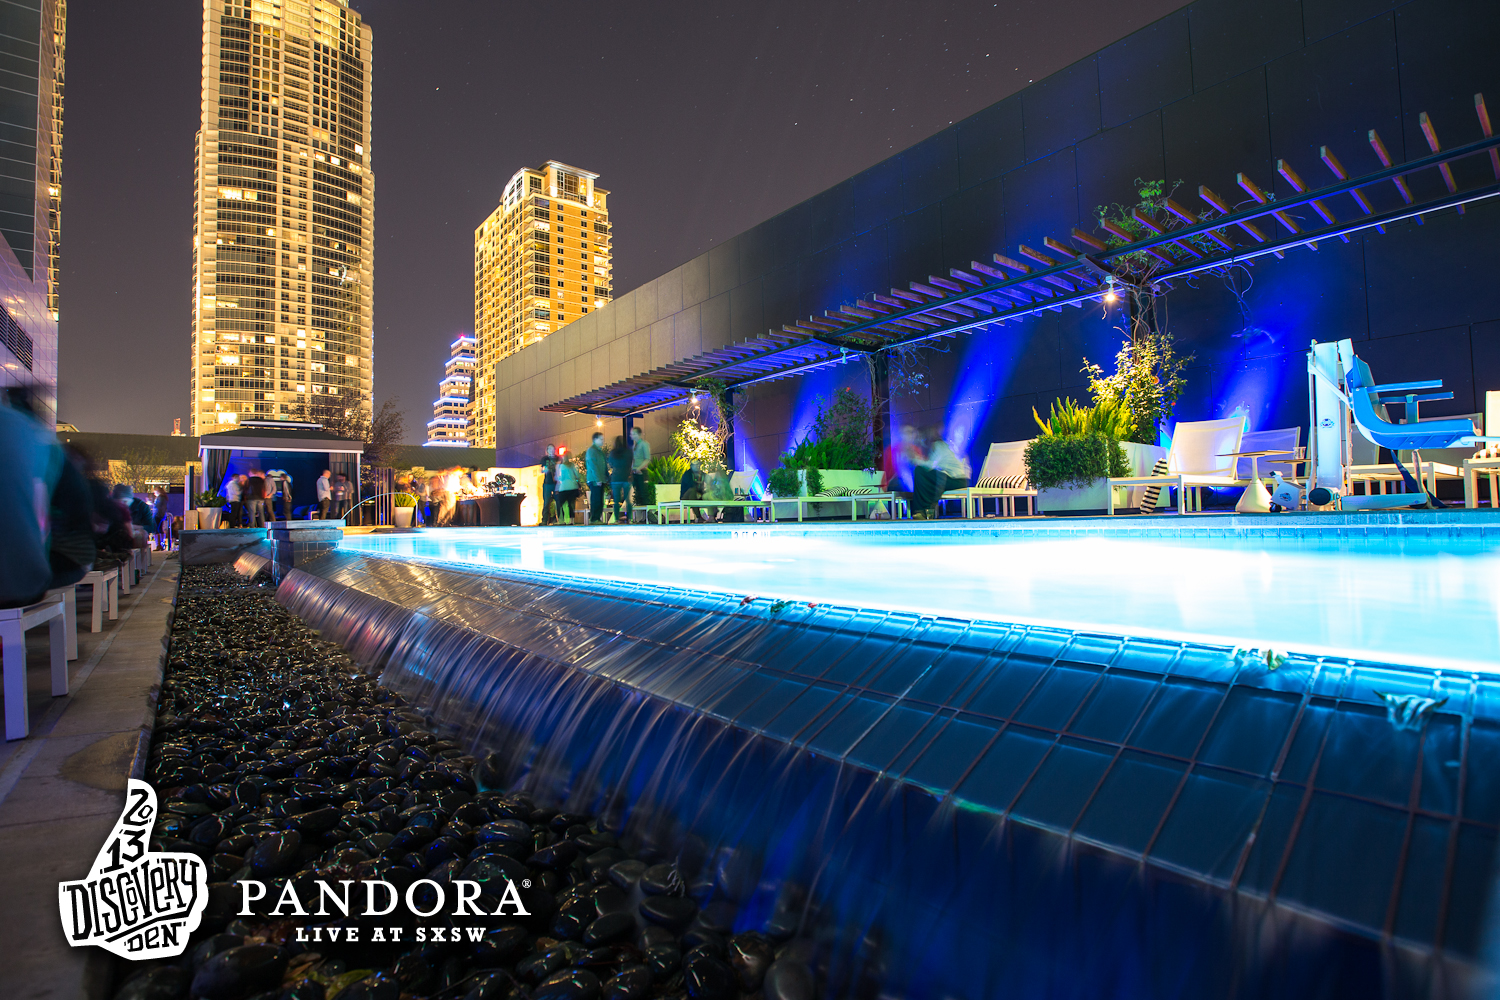 Pandora Discovery Den Kick-Off Party at The W WET Deck on March 11, 2013